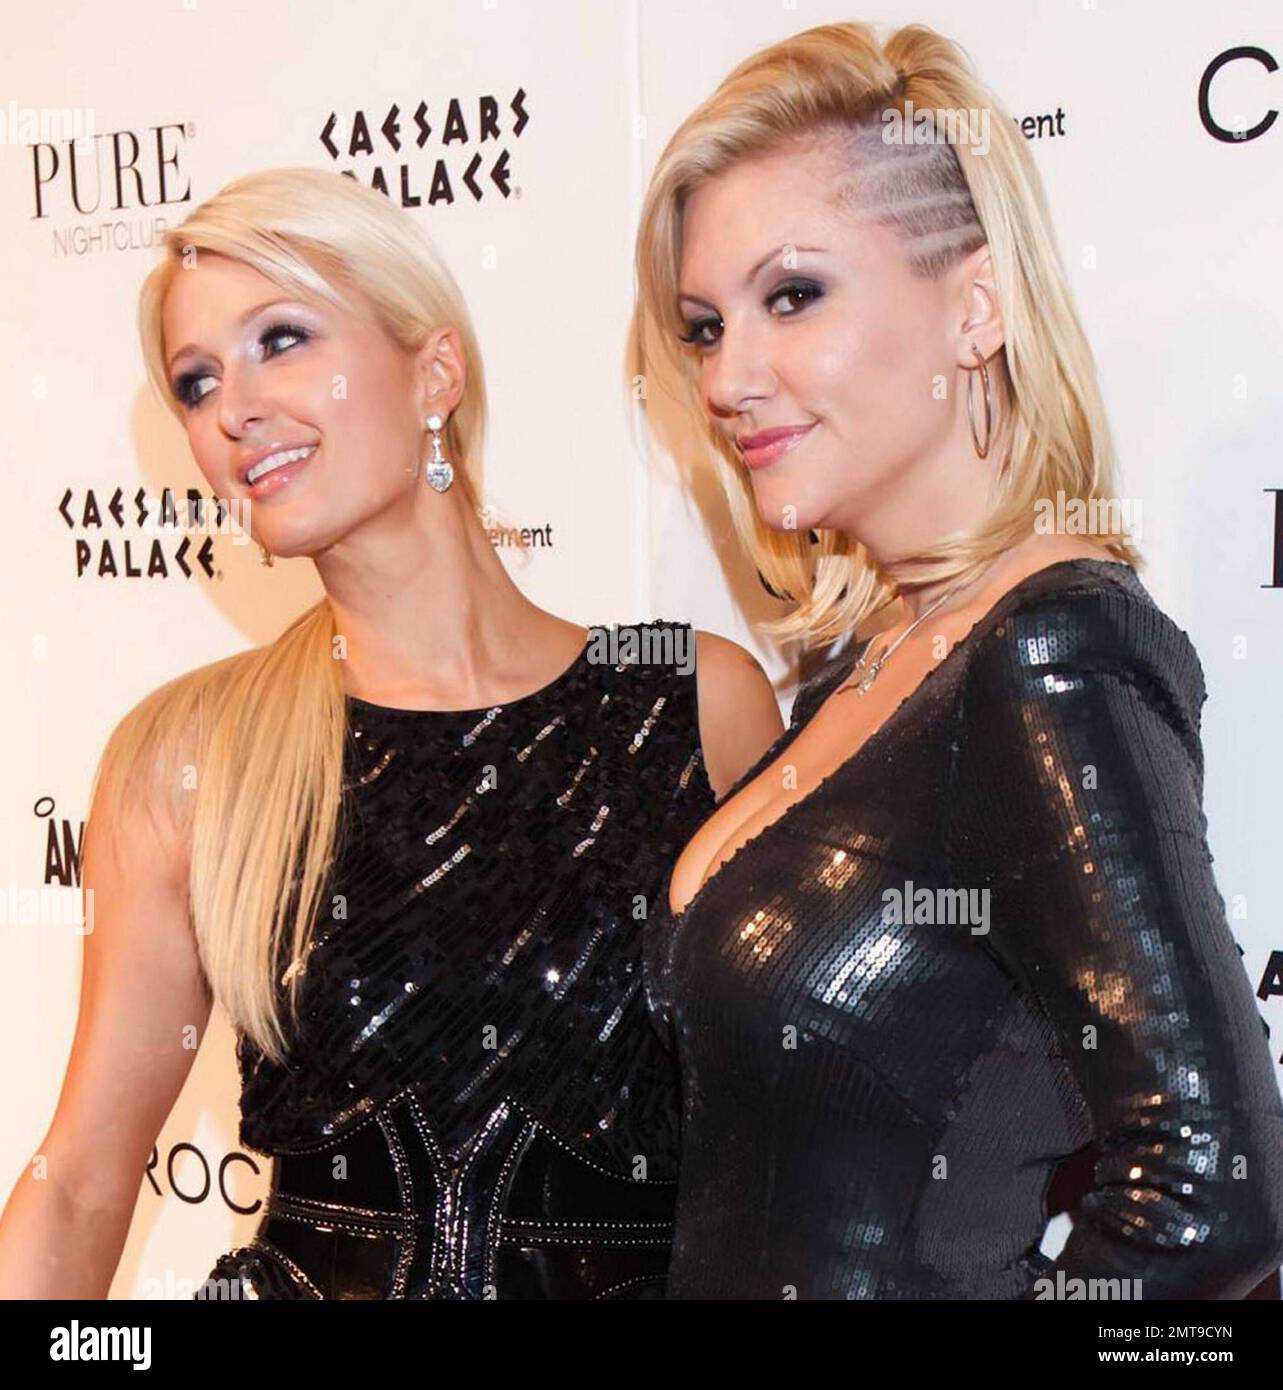 In a black sequin mini dress accessorized with a corset belt heiress Paris Hilton poses on the red carpet at Caesars Palace's Pure nightclub in celebration o Playboy playmate Jennier Rovero's 31st birthday.  On the carpet Paris, who appeared to have blemished legs and wore gold nail polish, posed with Jennier who showed o her detailed undercut hairdo. Las Vegas, NV. 12/14/10. Stock Photo